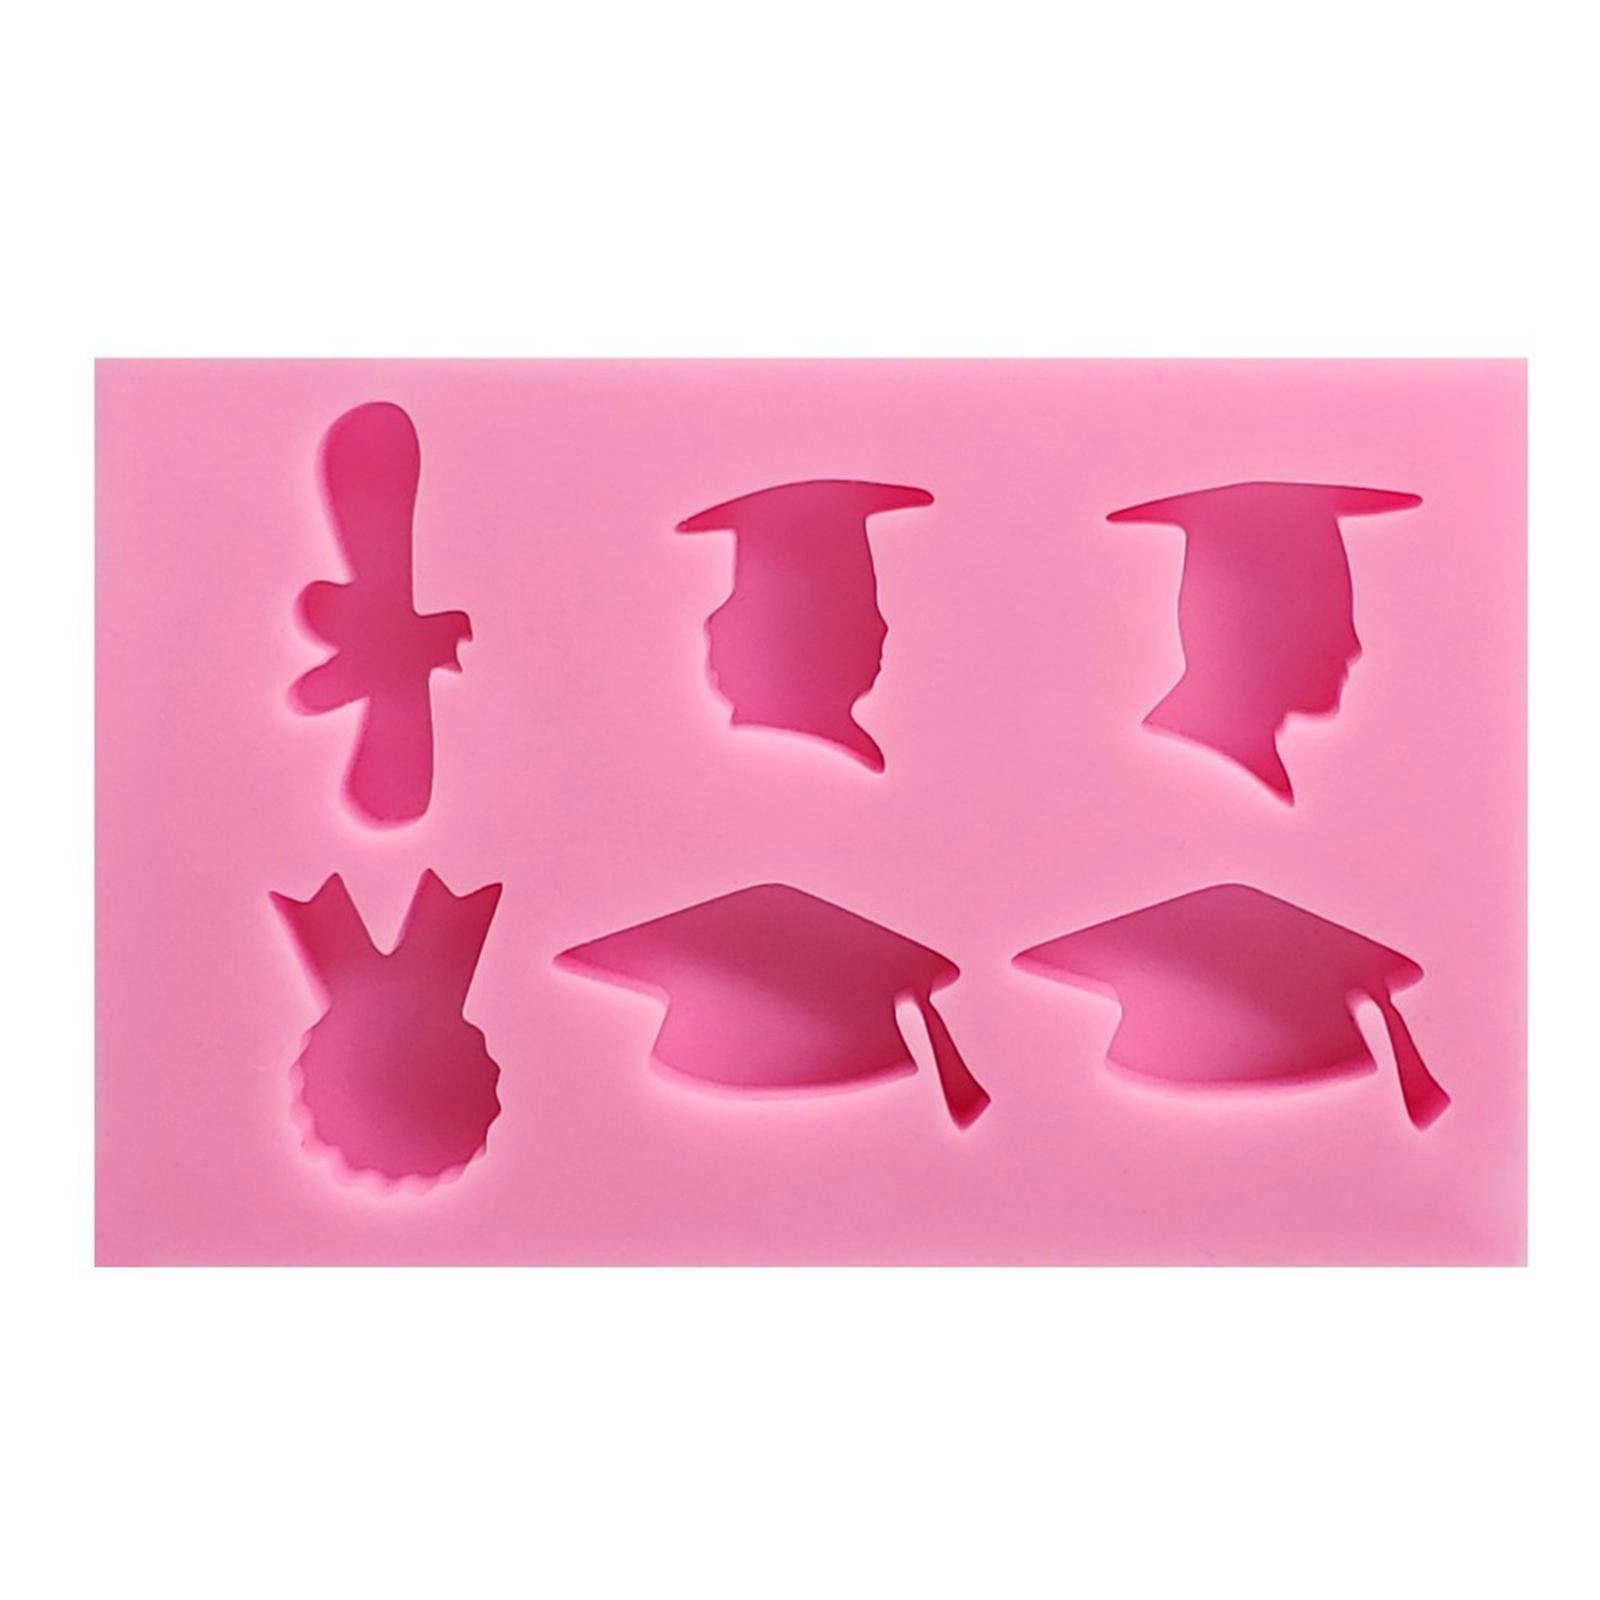 Graduation Ceremony Party Gift Decor Bachelor Mold Tray pink Graduation Season Silicone Mold with Hat Certification Diploma and Paper Shape for Chocolate Cake Topper Decoration Pink 